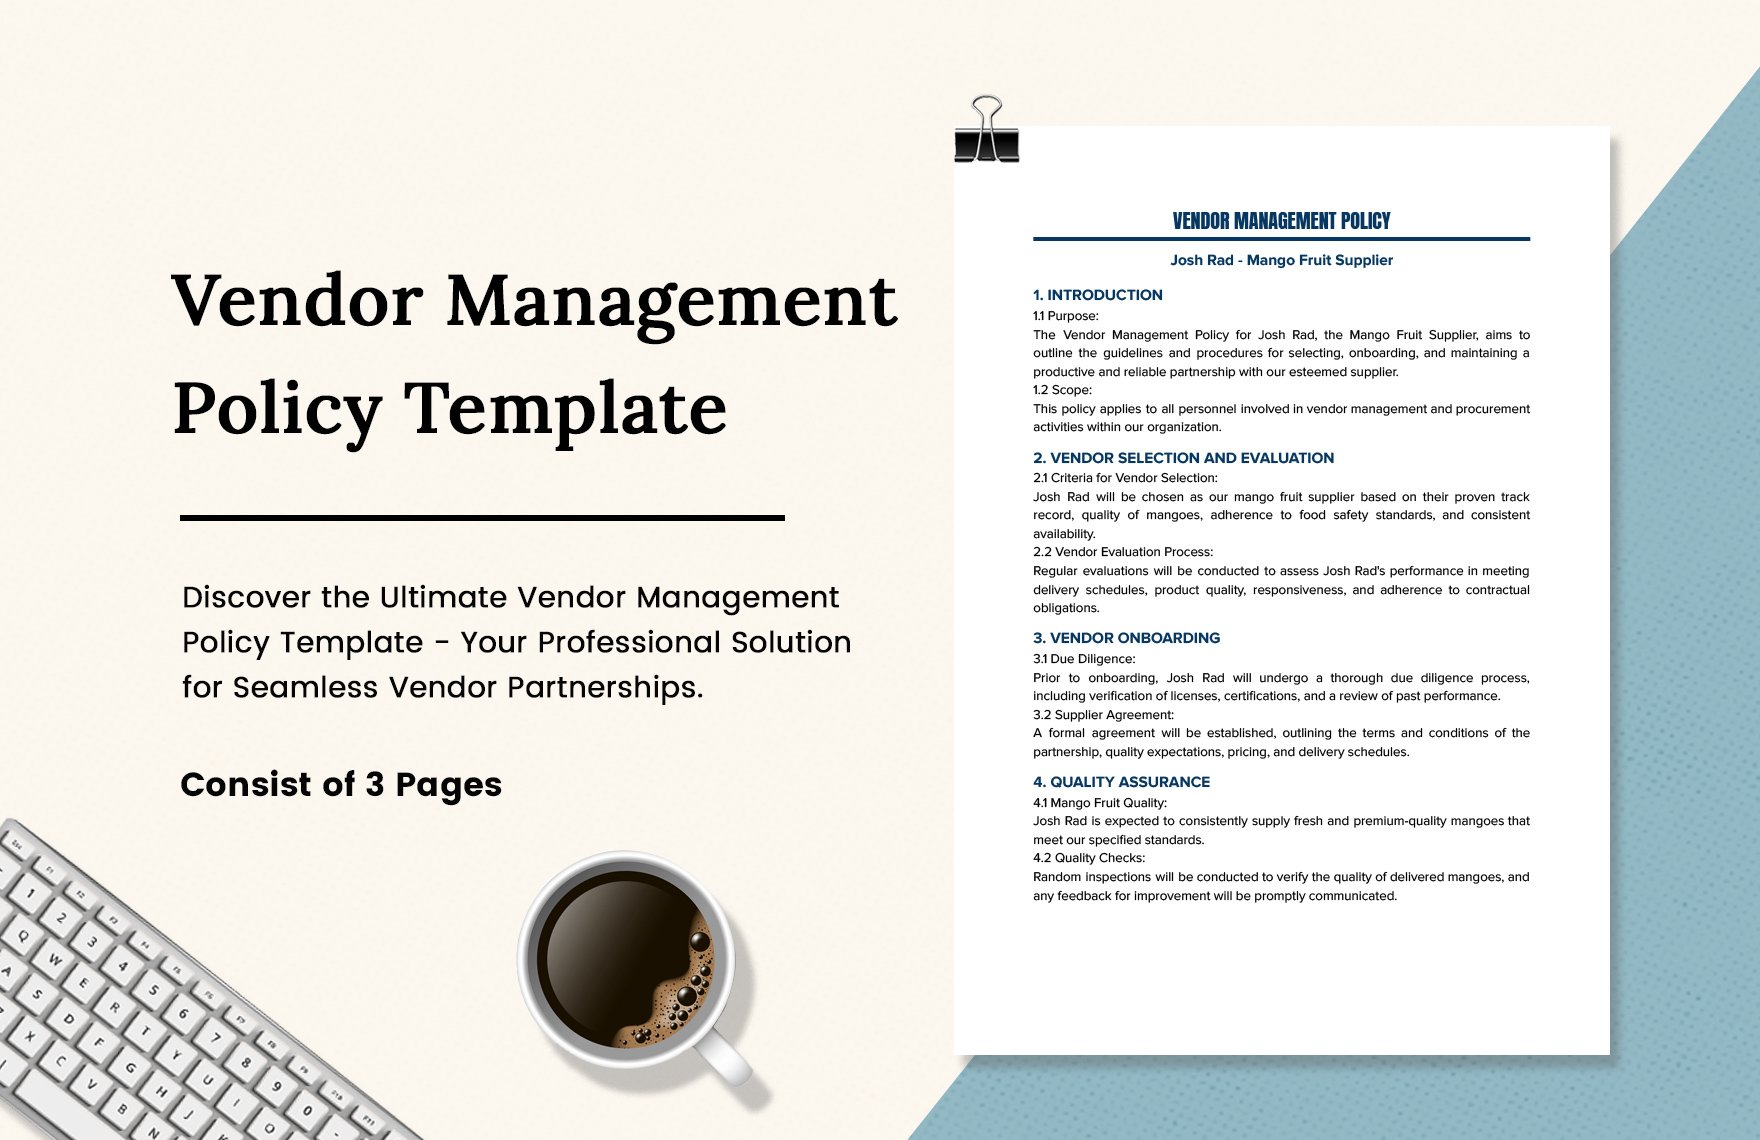 Vendor Management Policy Template